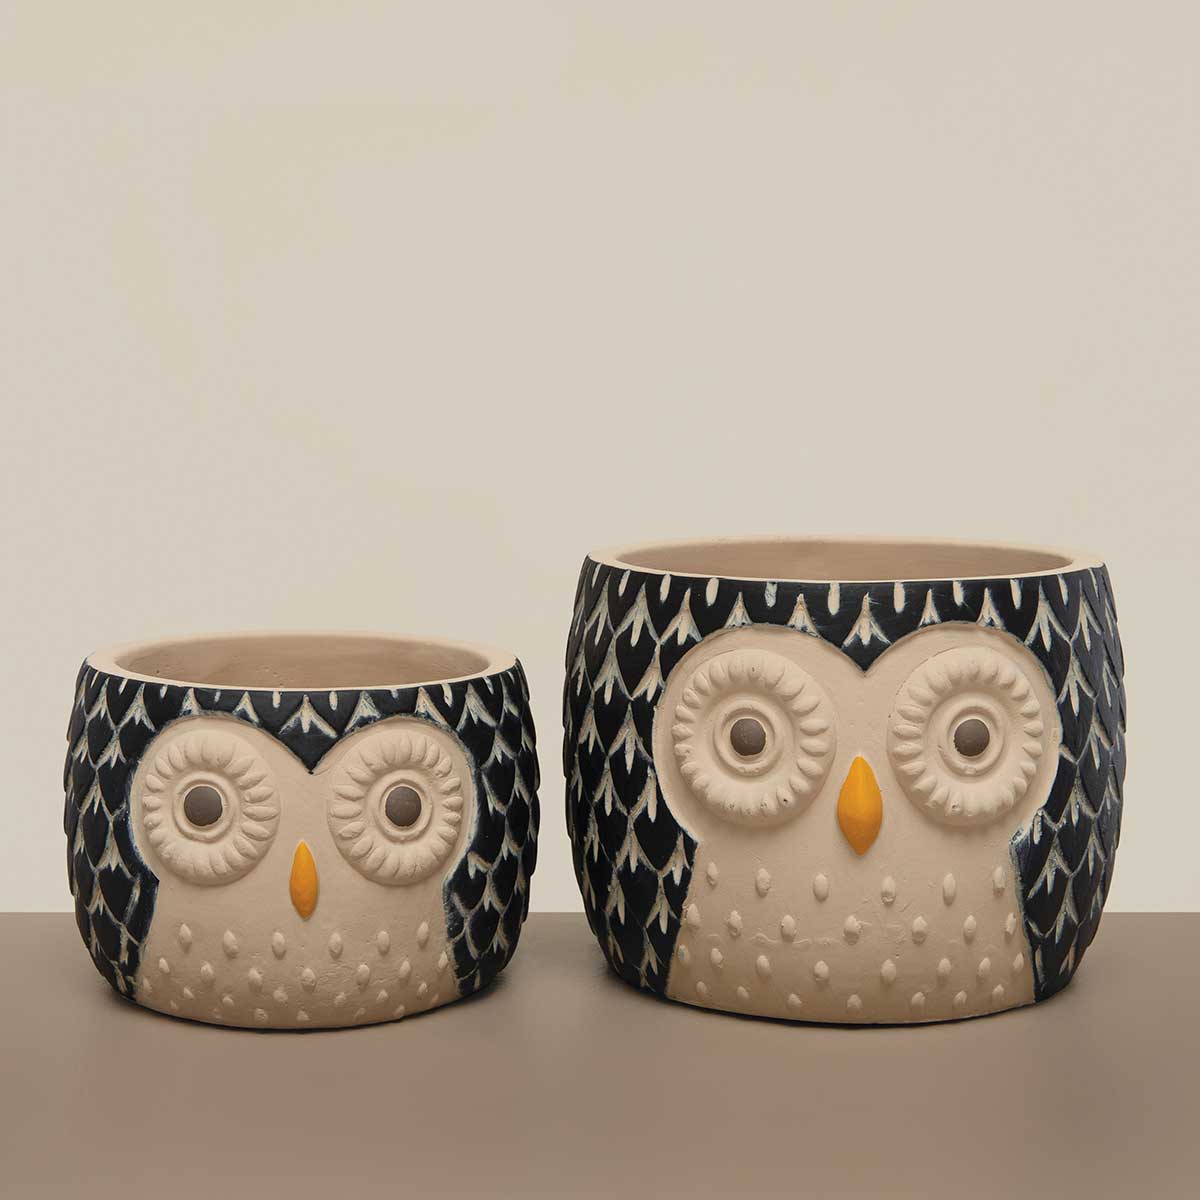 POT HOOTIE OWL SMALL 5.5IN X 4IN BLACK/BEIGE CONCRETE - Click Image to Close